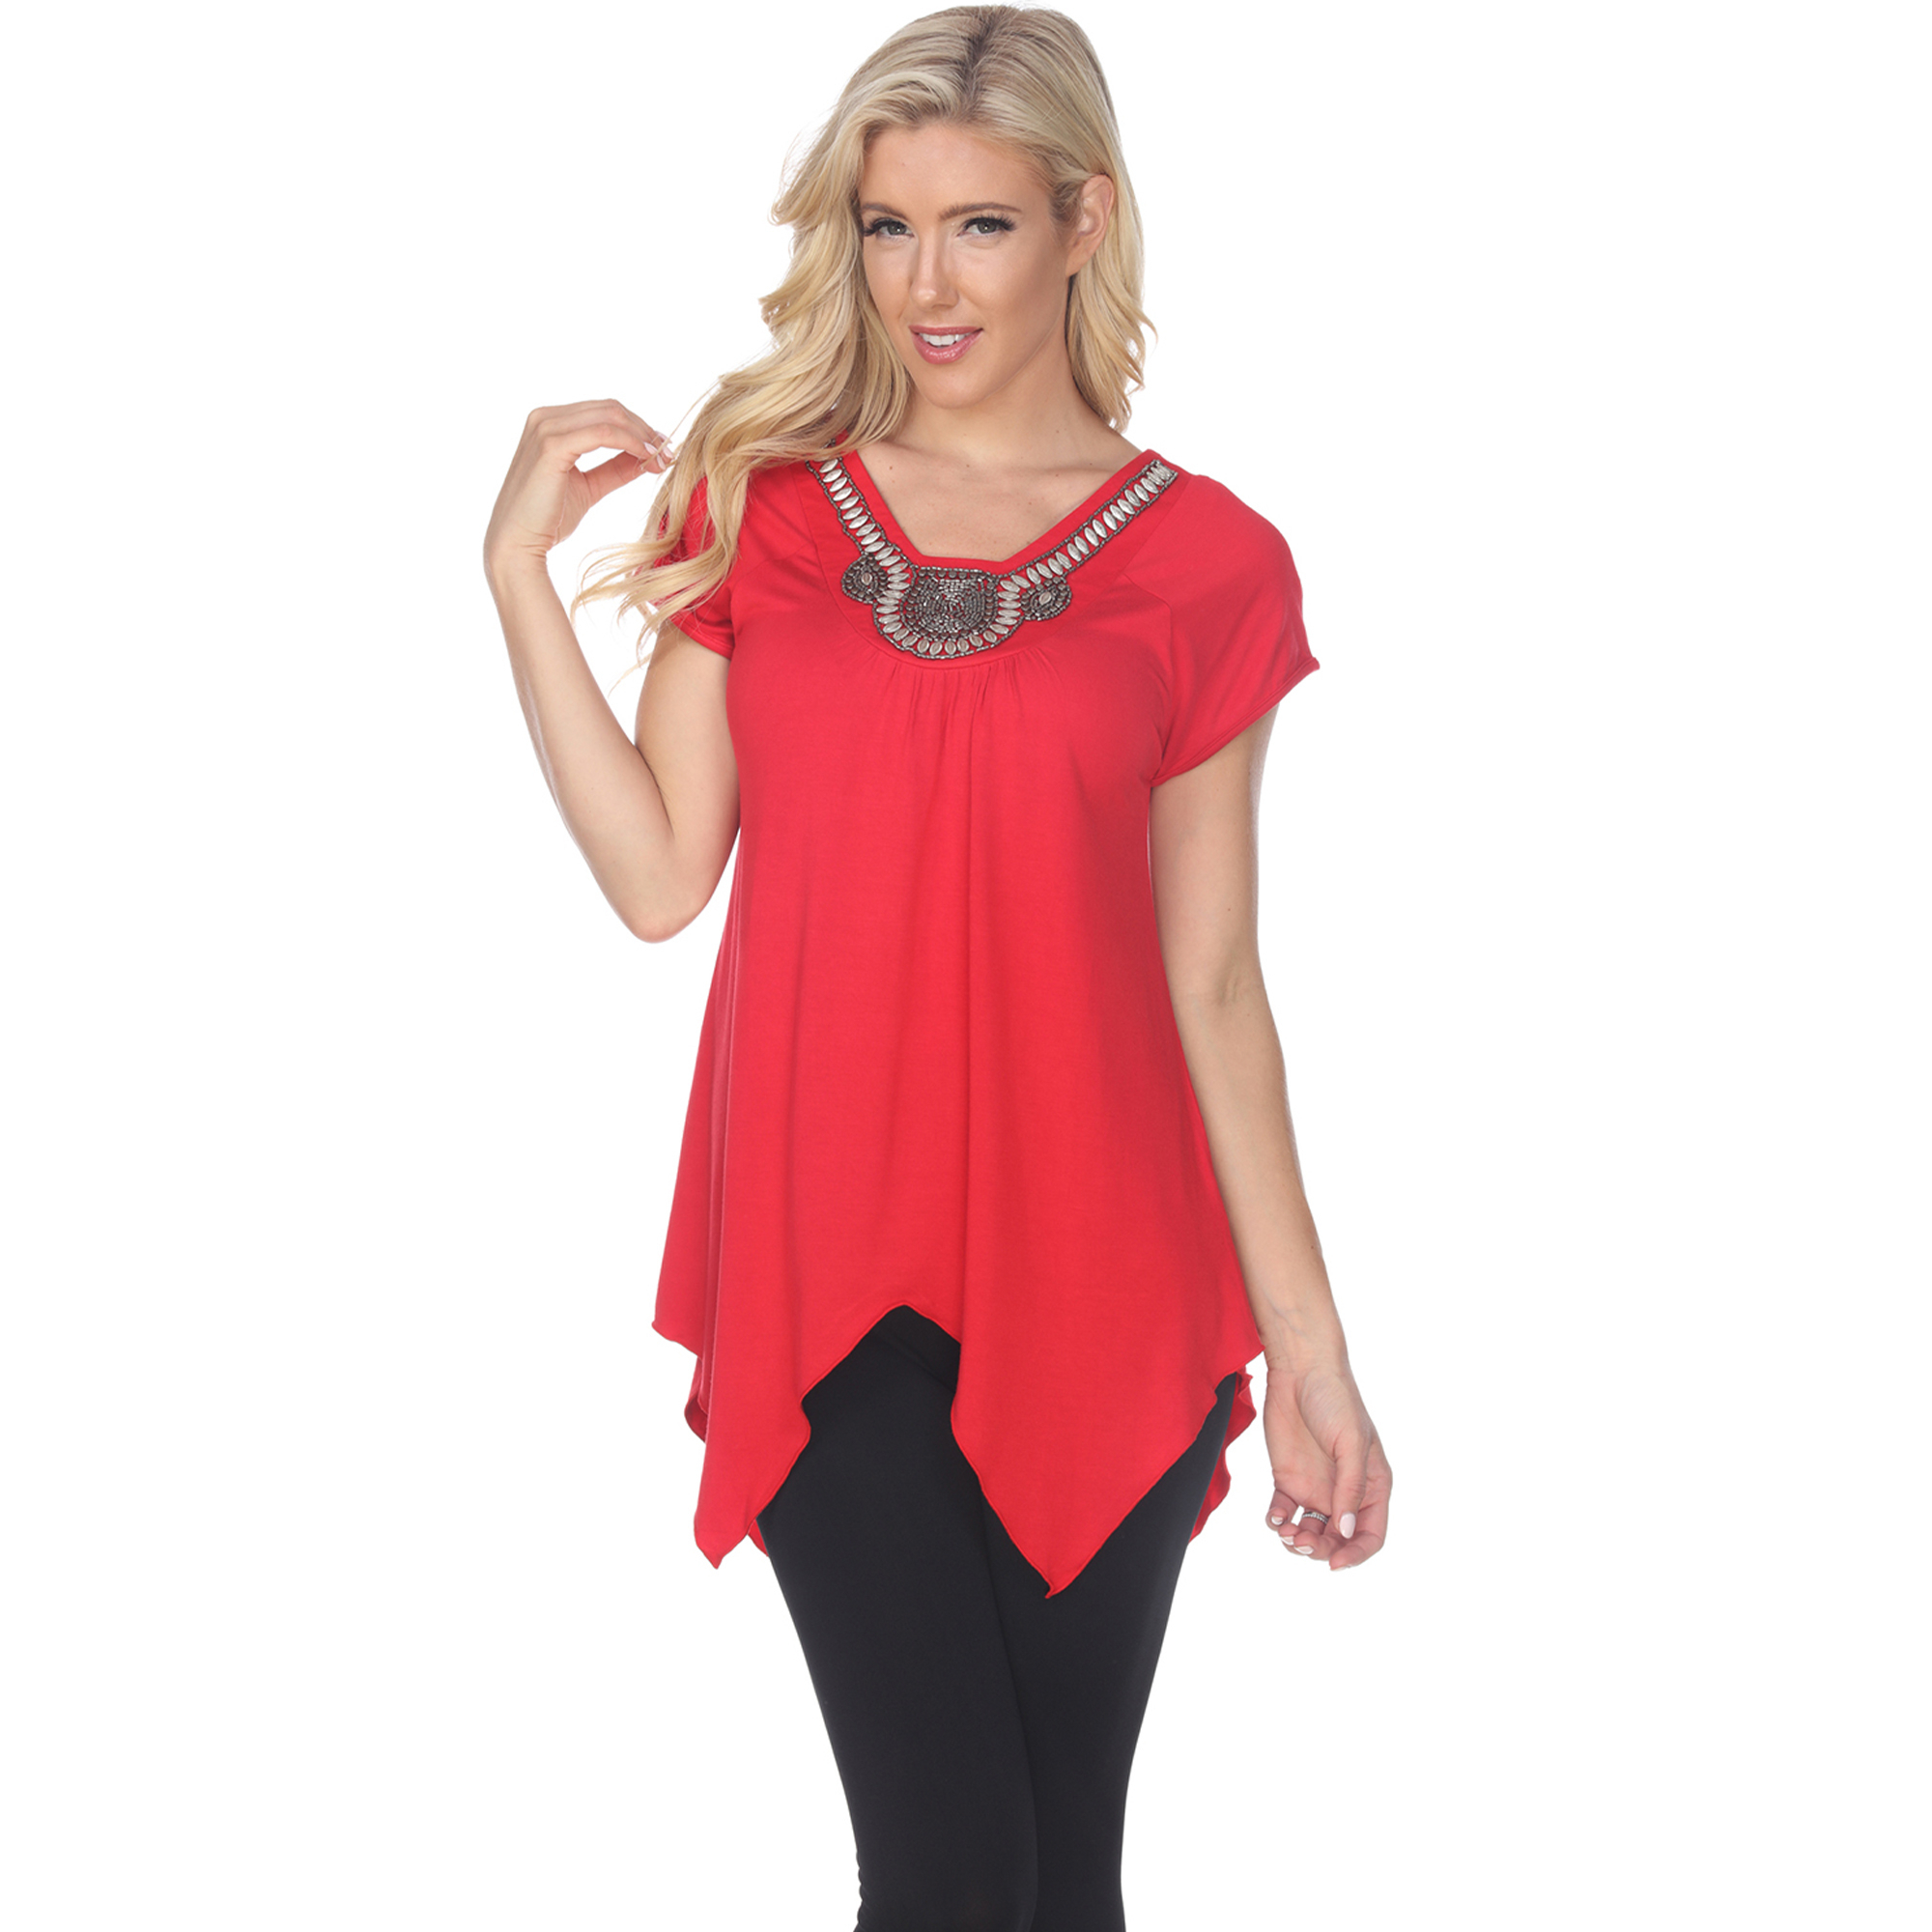 White Mark Women's Embellished Tunic Top - Red, Small